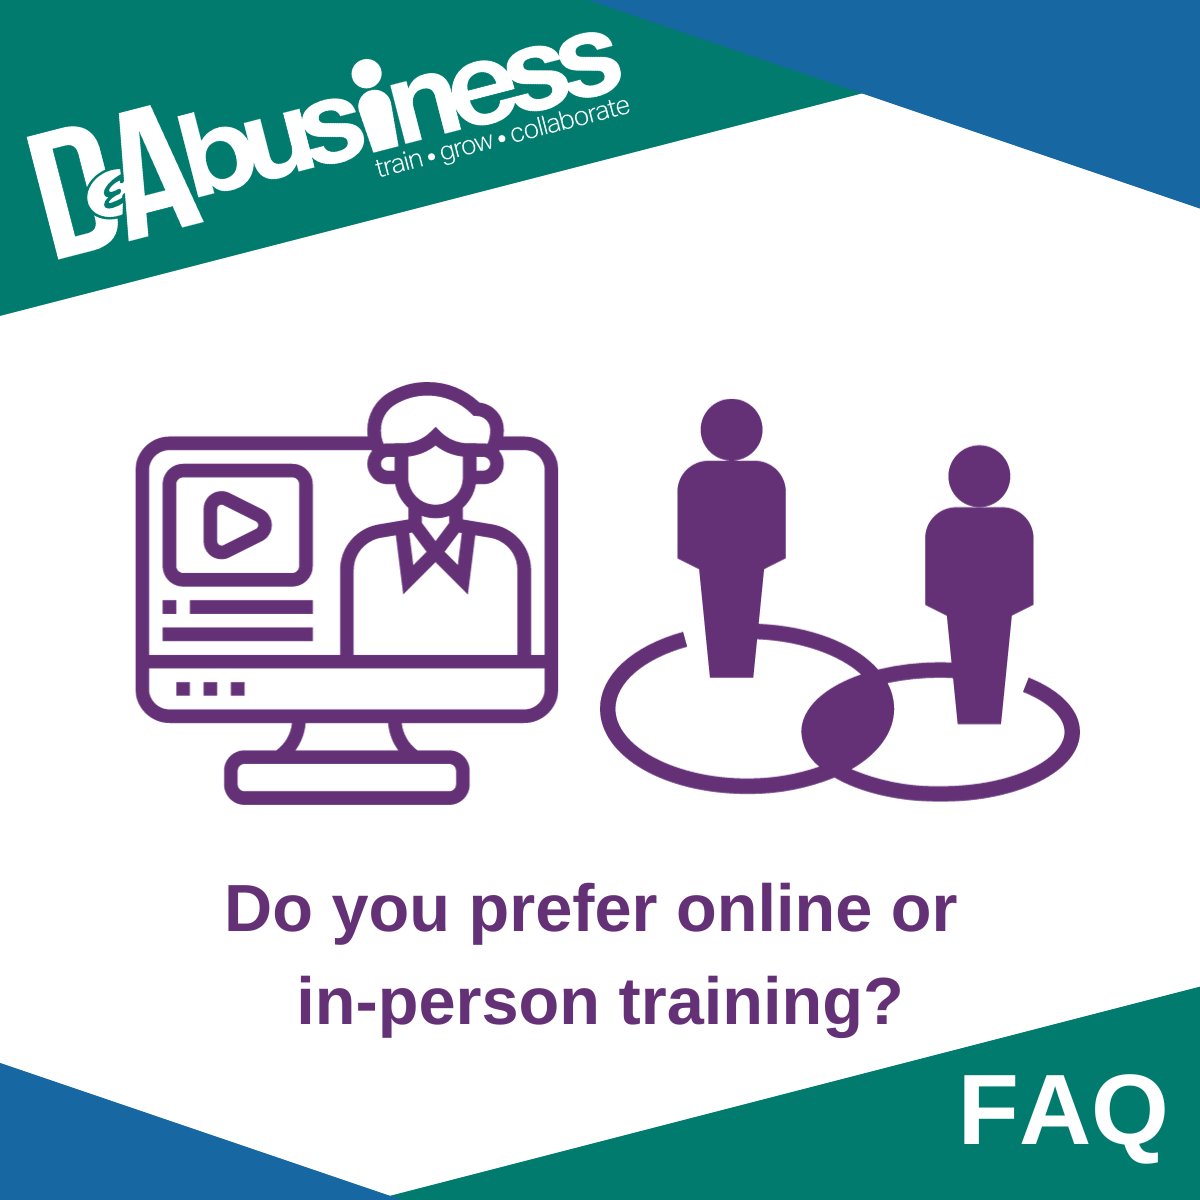 Online or face to face? 💻🤔 Whichever your preference, we can offer bespoke training for your businesses requirements. Contact us today 👉pulse.ly/9jhjqoxbjp #DABusiness #OnlineTraining #FaceToFaceTraining #BespokeCourses